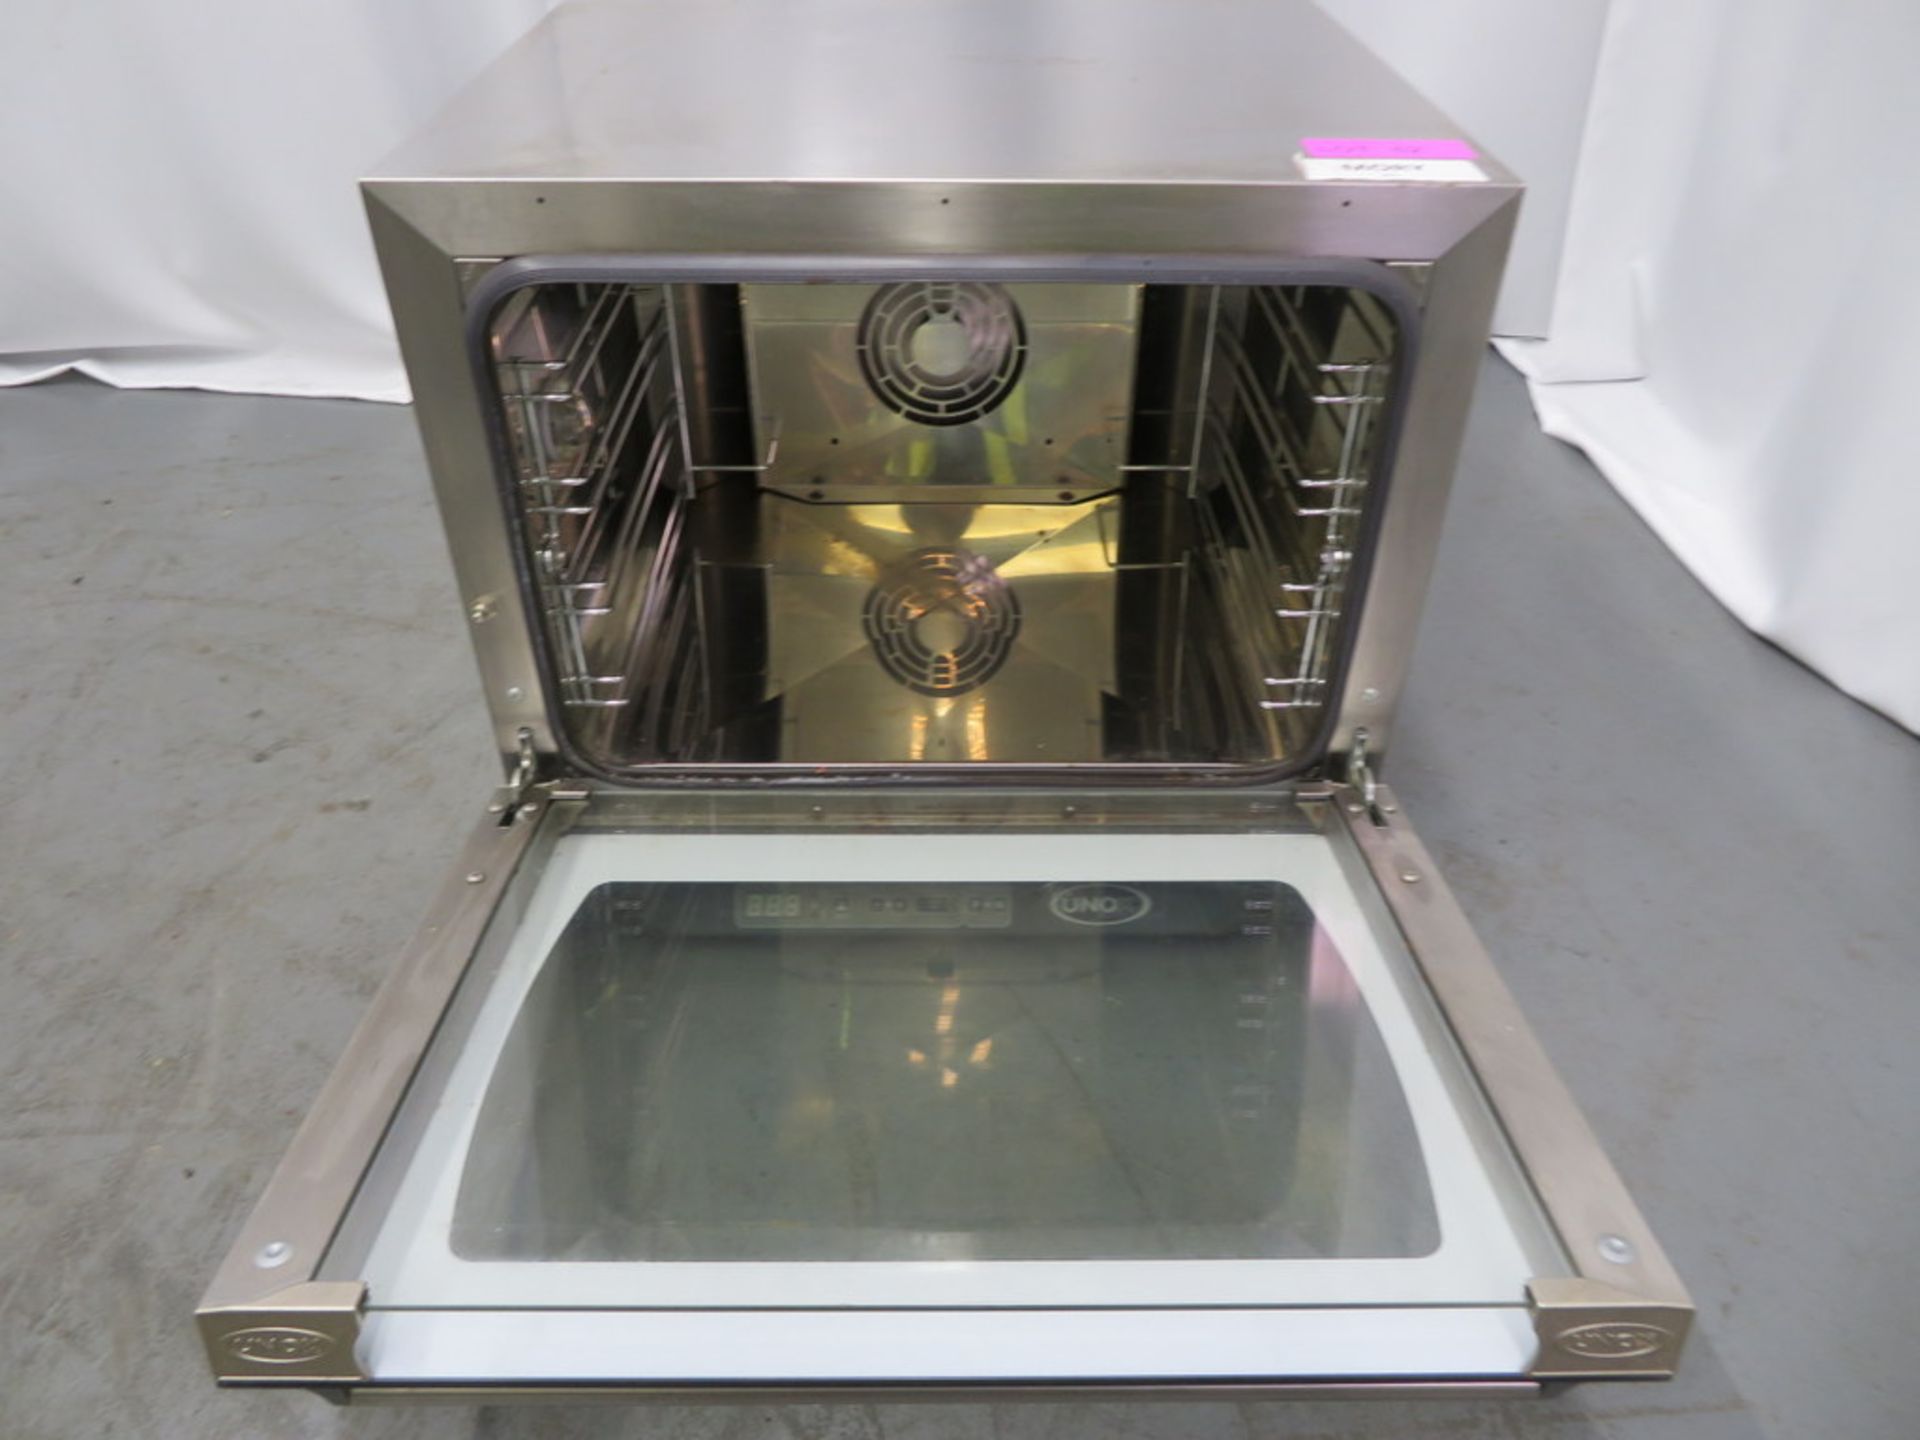 2011 UNOX MODEL XF130-B COMPACT CONVECTION OVEN - Image 3 of 5